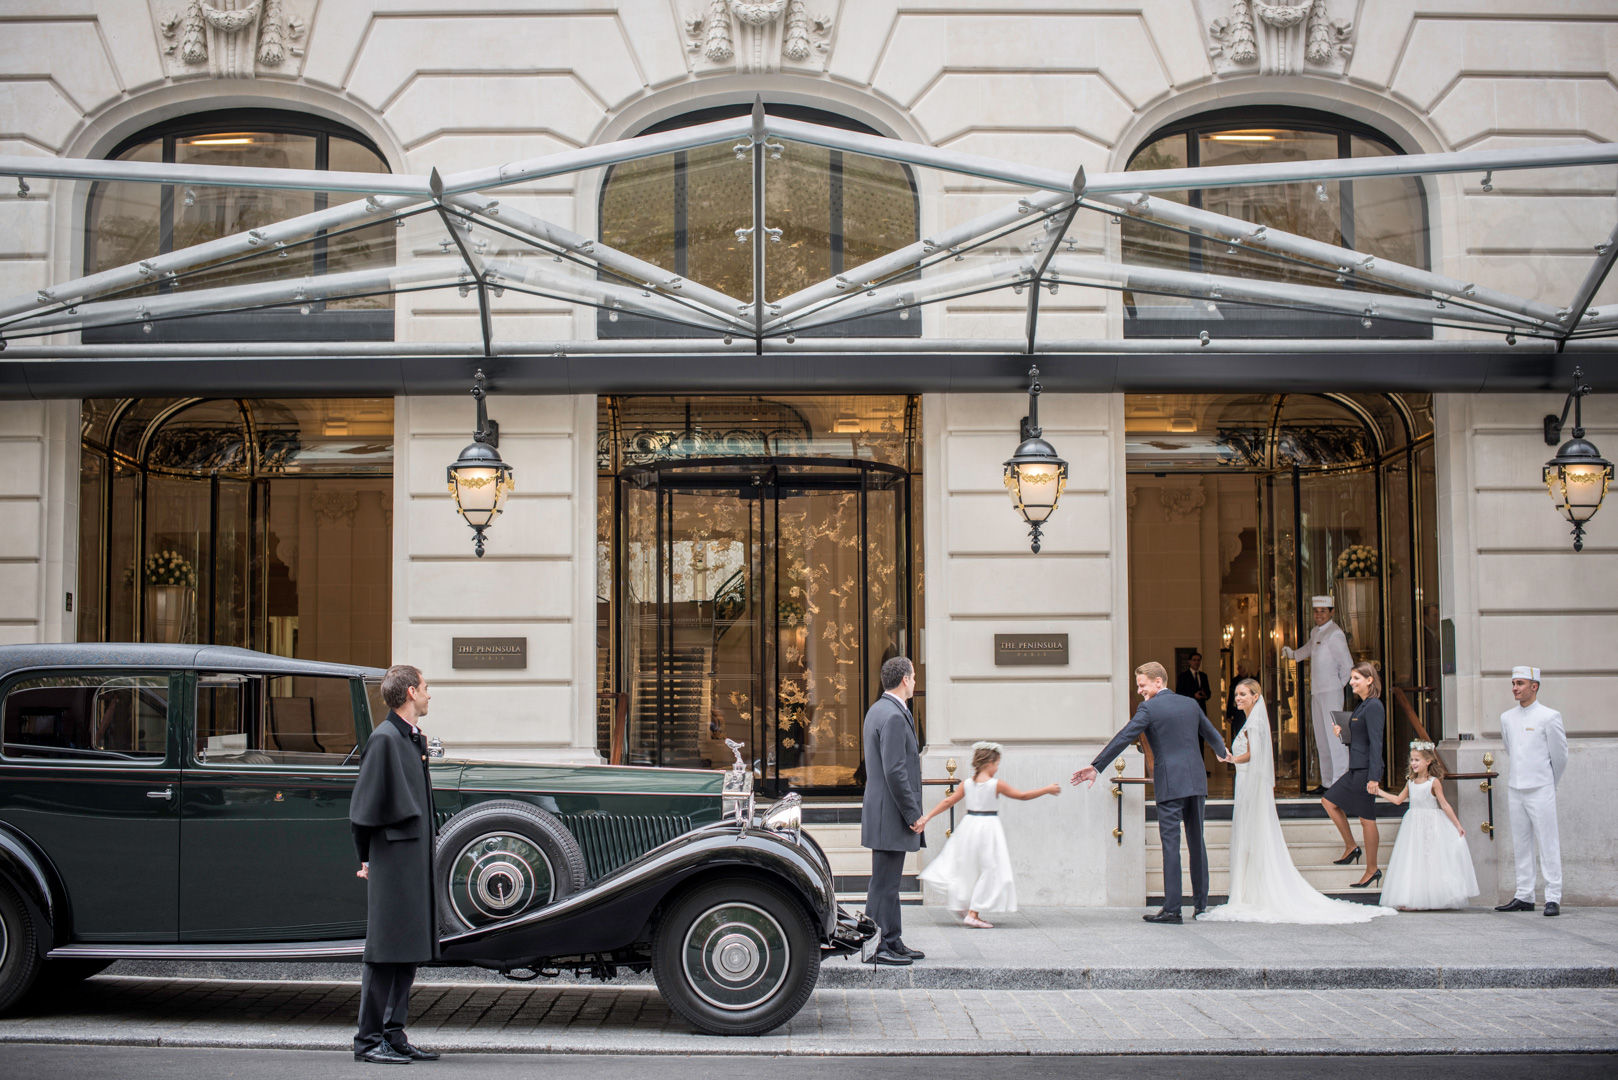 Celebrate your wedding in the heart of Paris at The Peninsula